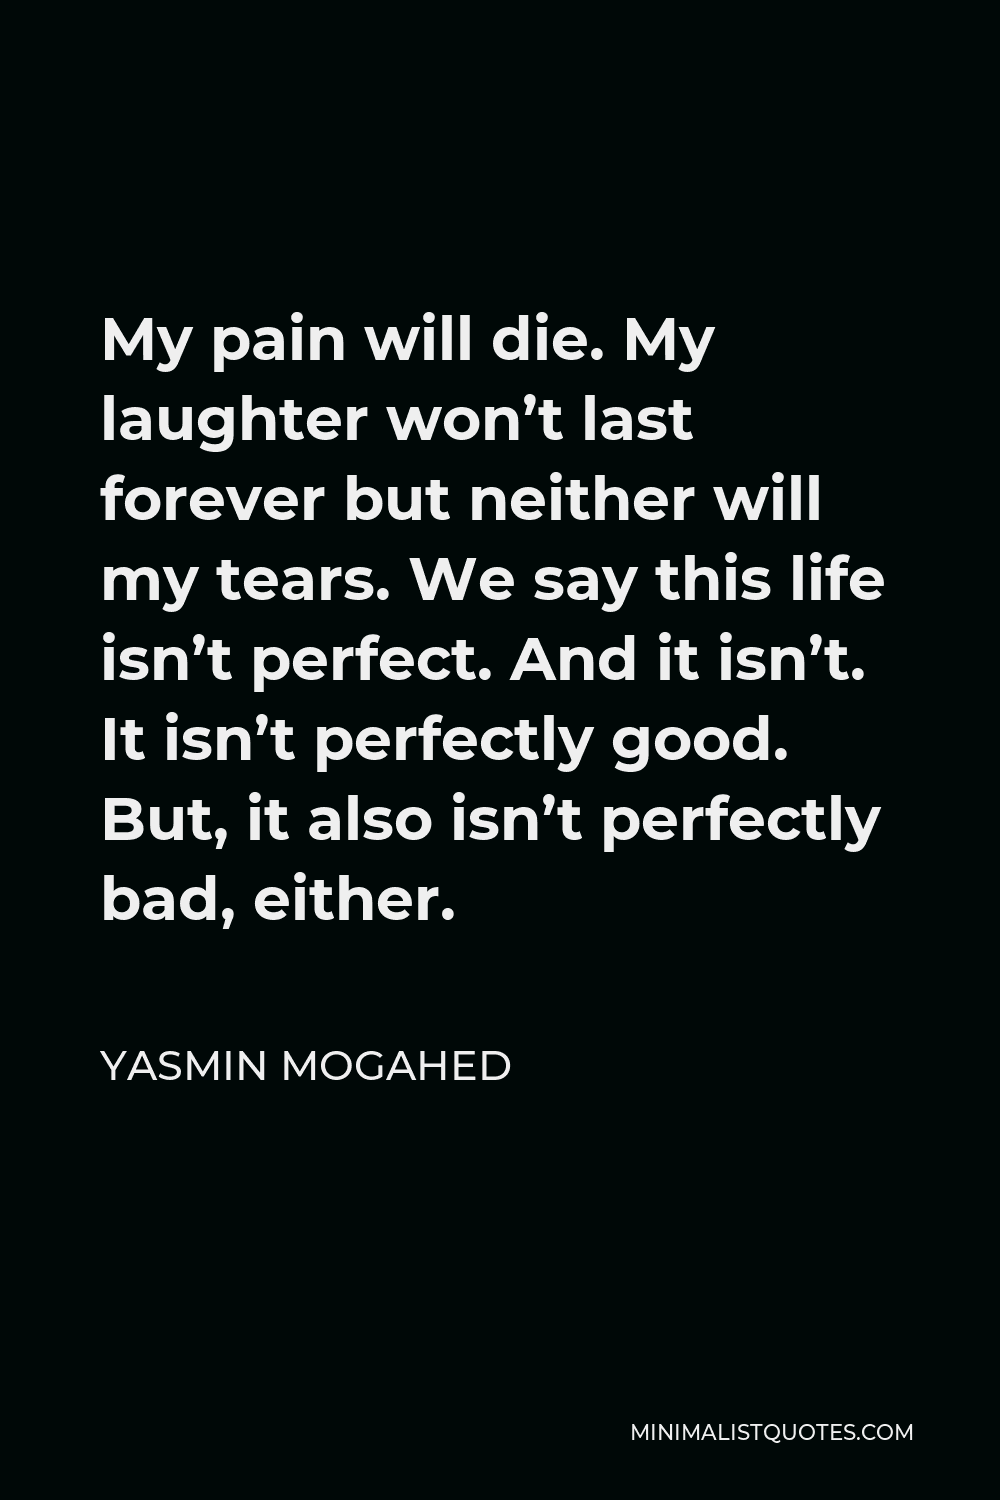 Yasmin Mogahed Quote - My pain will die. My laughter won’t last forever but neither will my tears. We say this life isn’t perfect. And it isn’t. It isn’t perfectly good. But, it also isn’t perfectly bad, either.